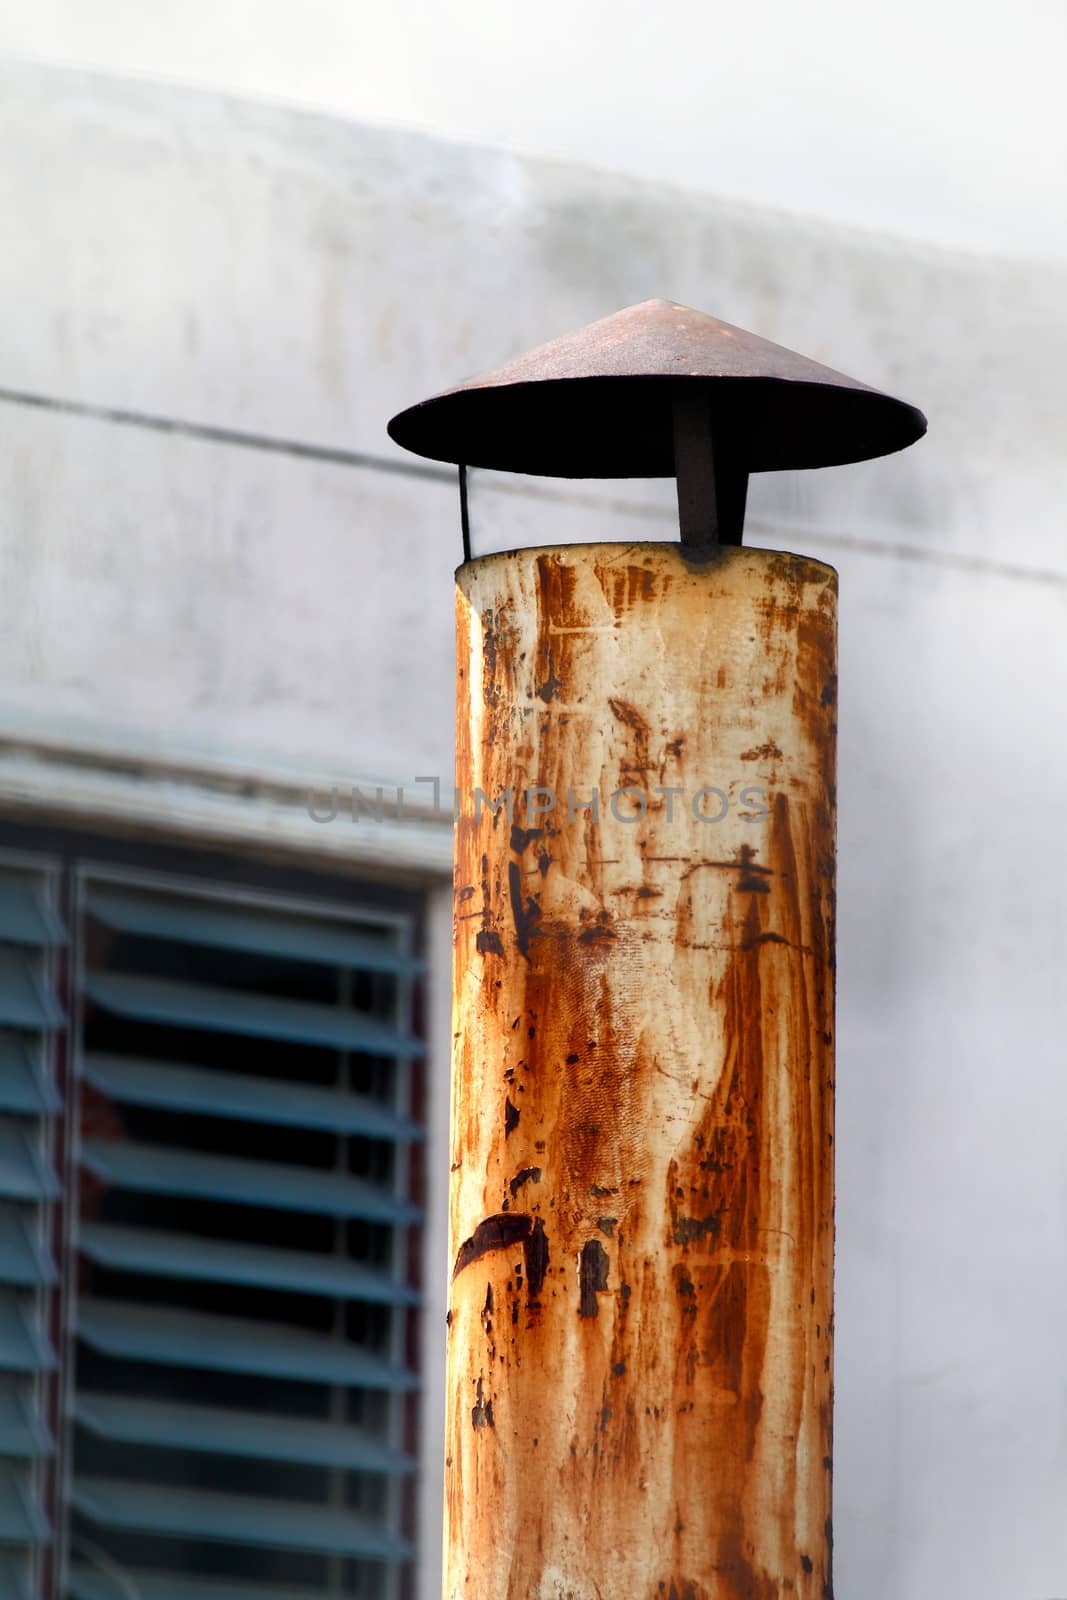 Smokestack steel on Industrial roof or home, Pollution smokestack small flue chimney with Smoke pollution